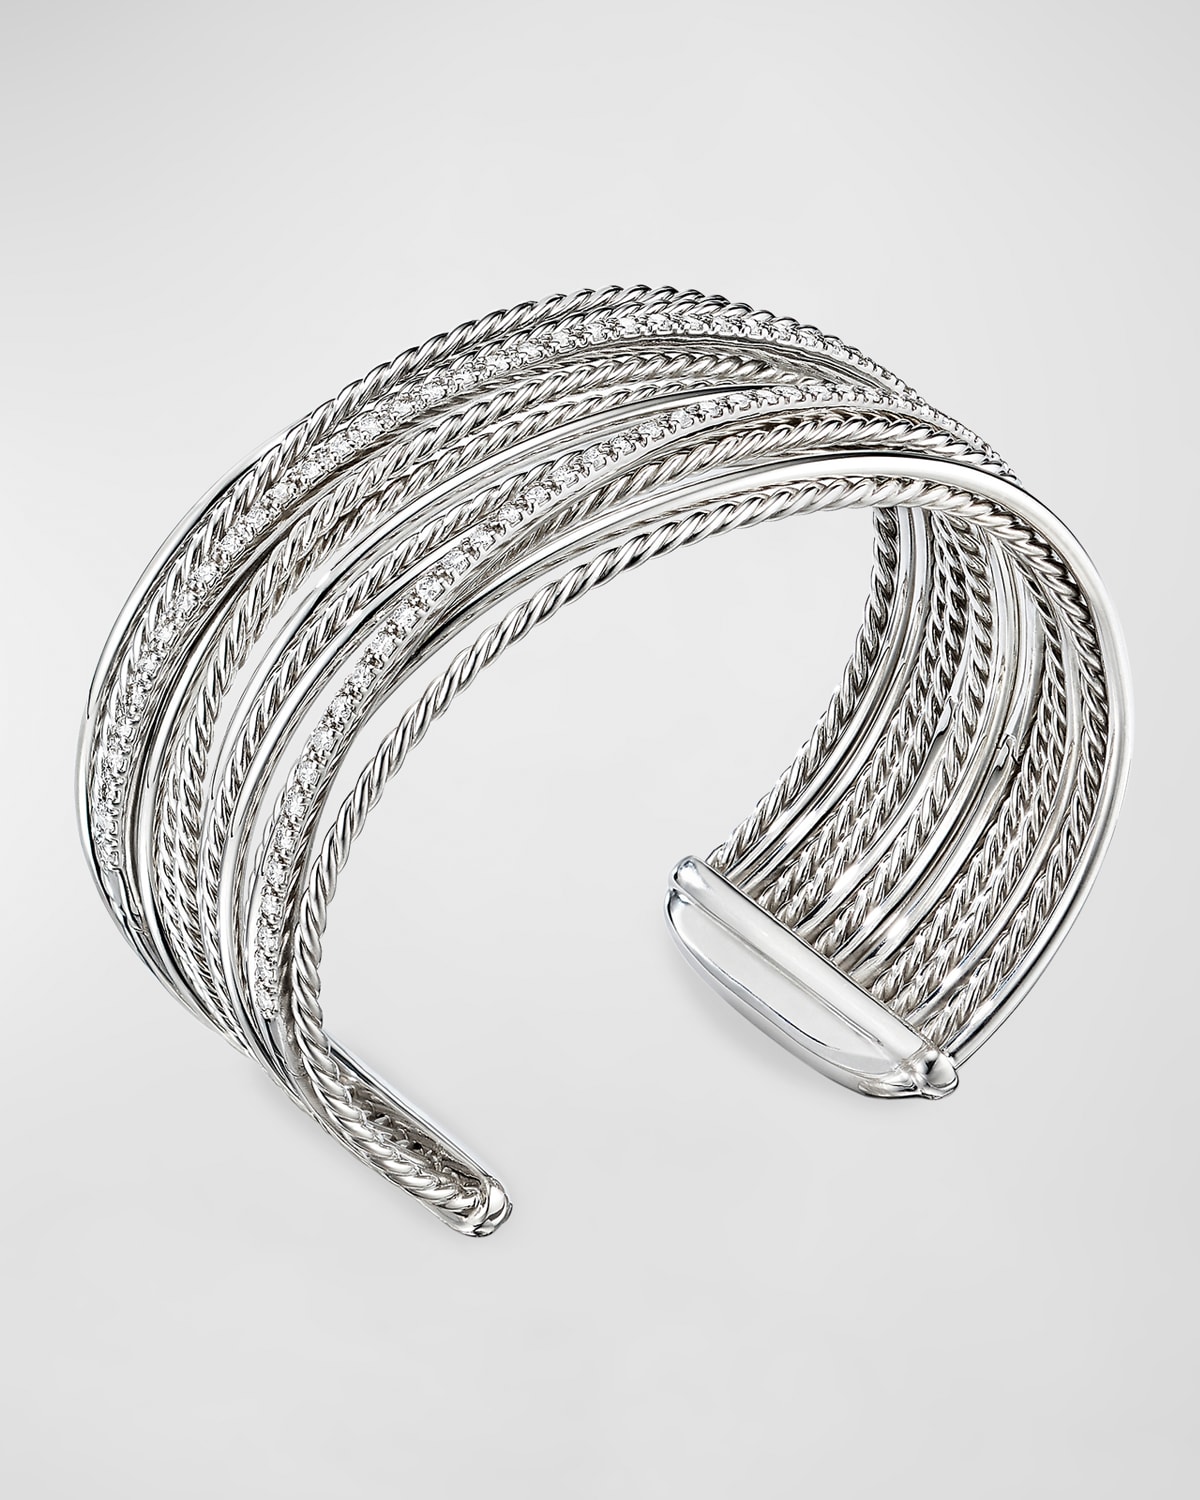 DY Crossover Cuff Bracelet with Diamonds in Silver, 28.5mm